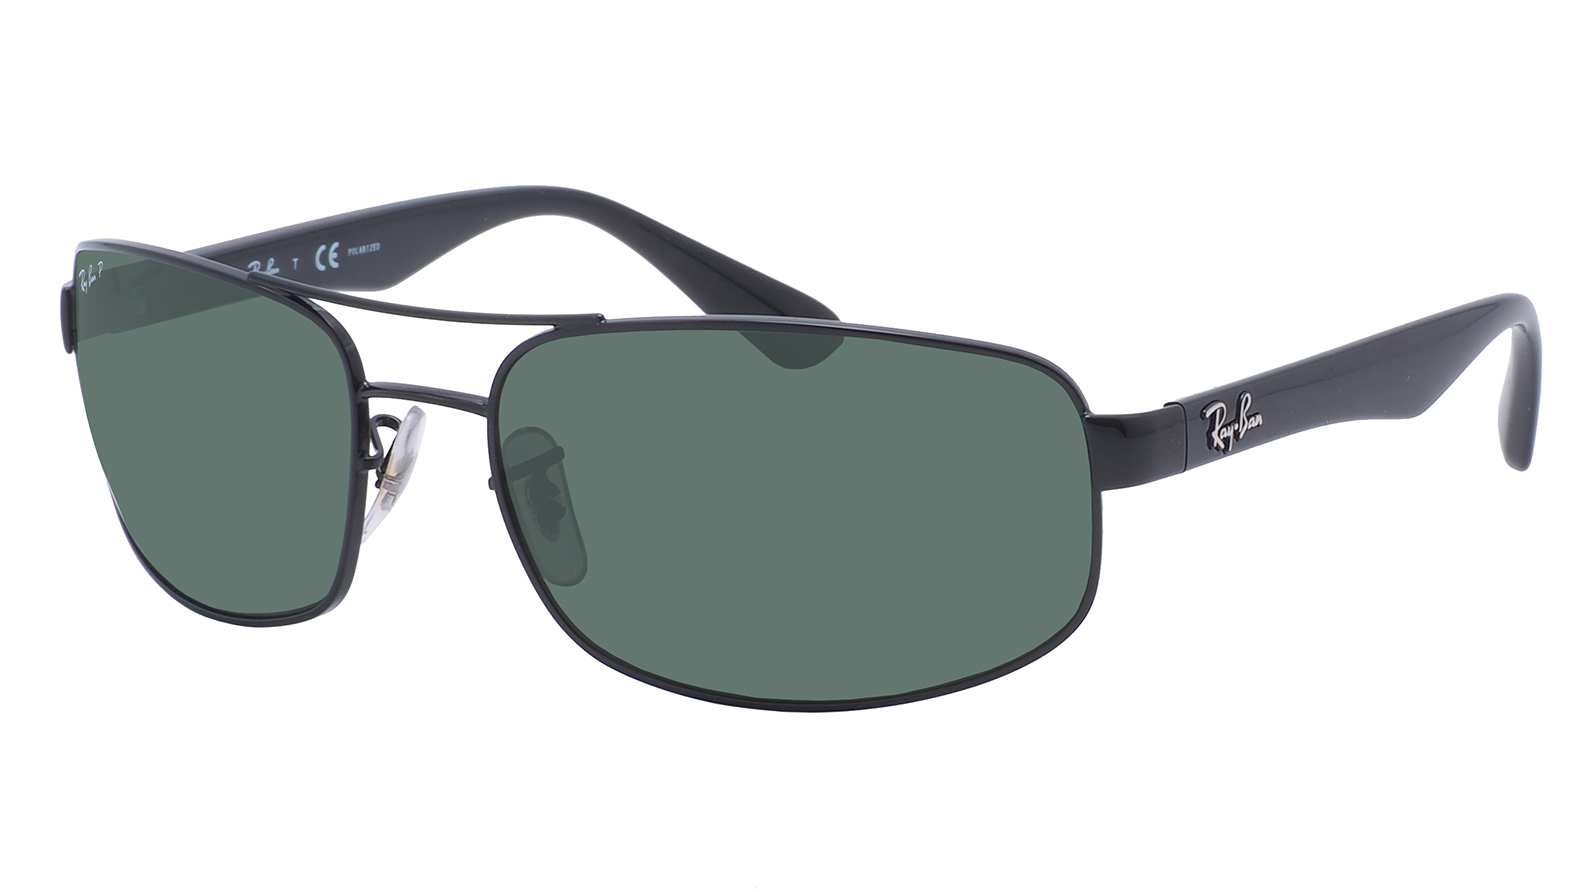 Ray-Ban Active Lifestyle RB 3445 002/58 ray ban active lifestyle rx 7078 2012